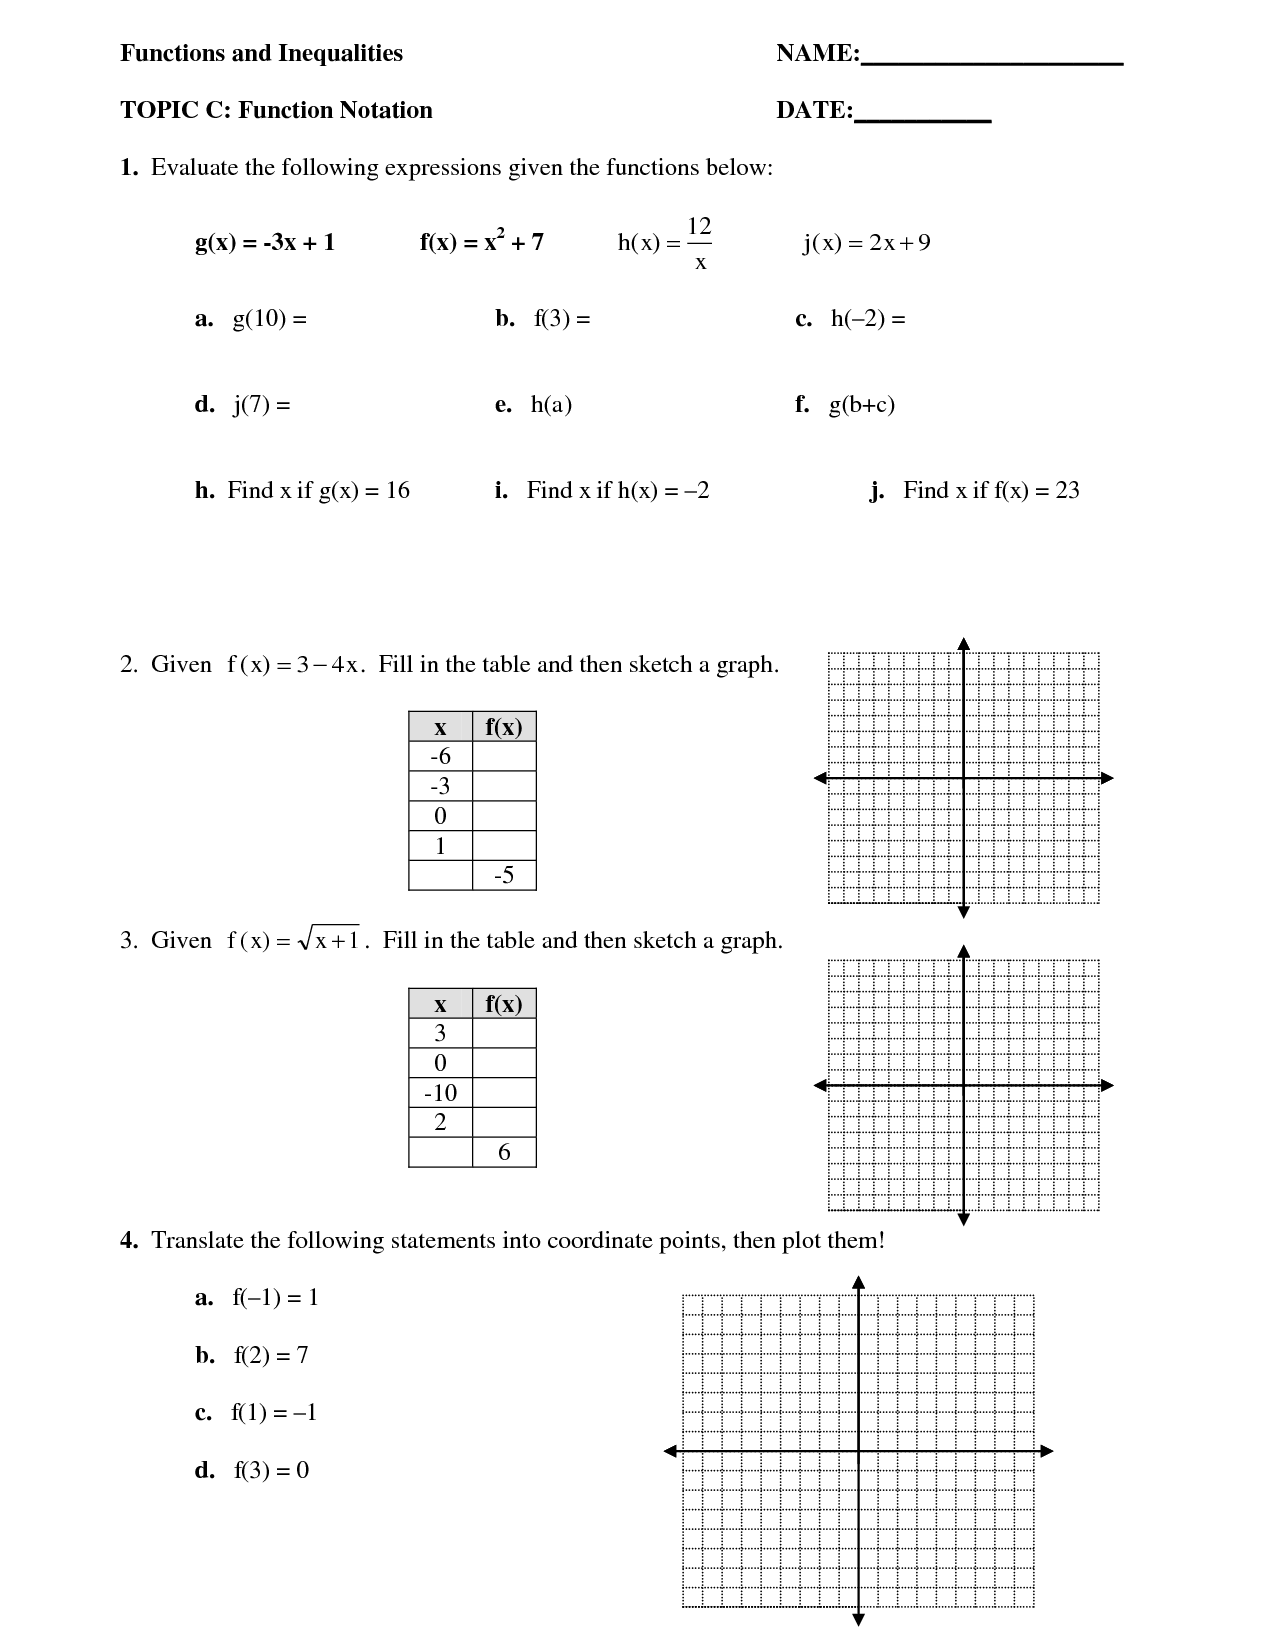 Evaluating Functions Coloring Worksheet Answer Key